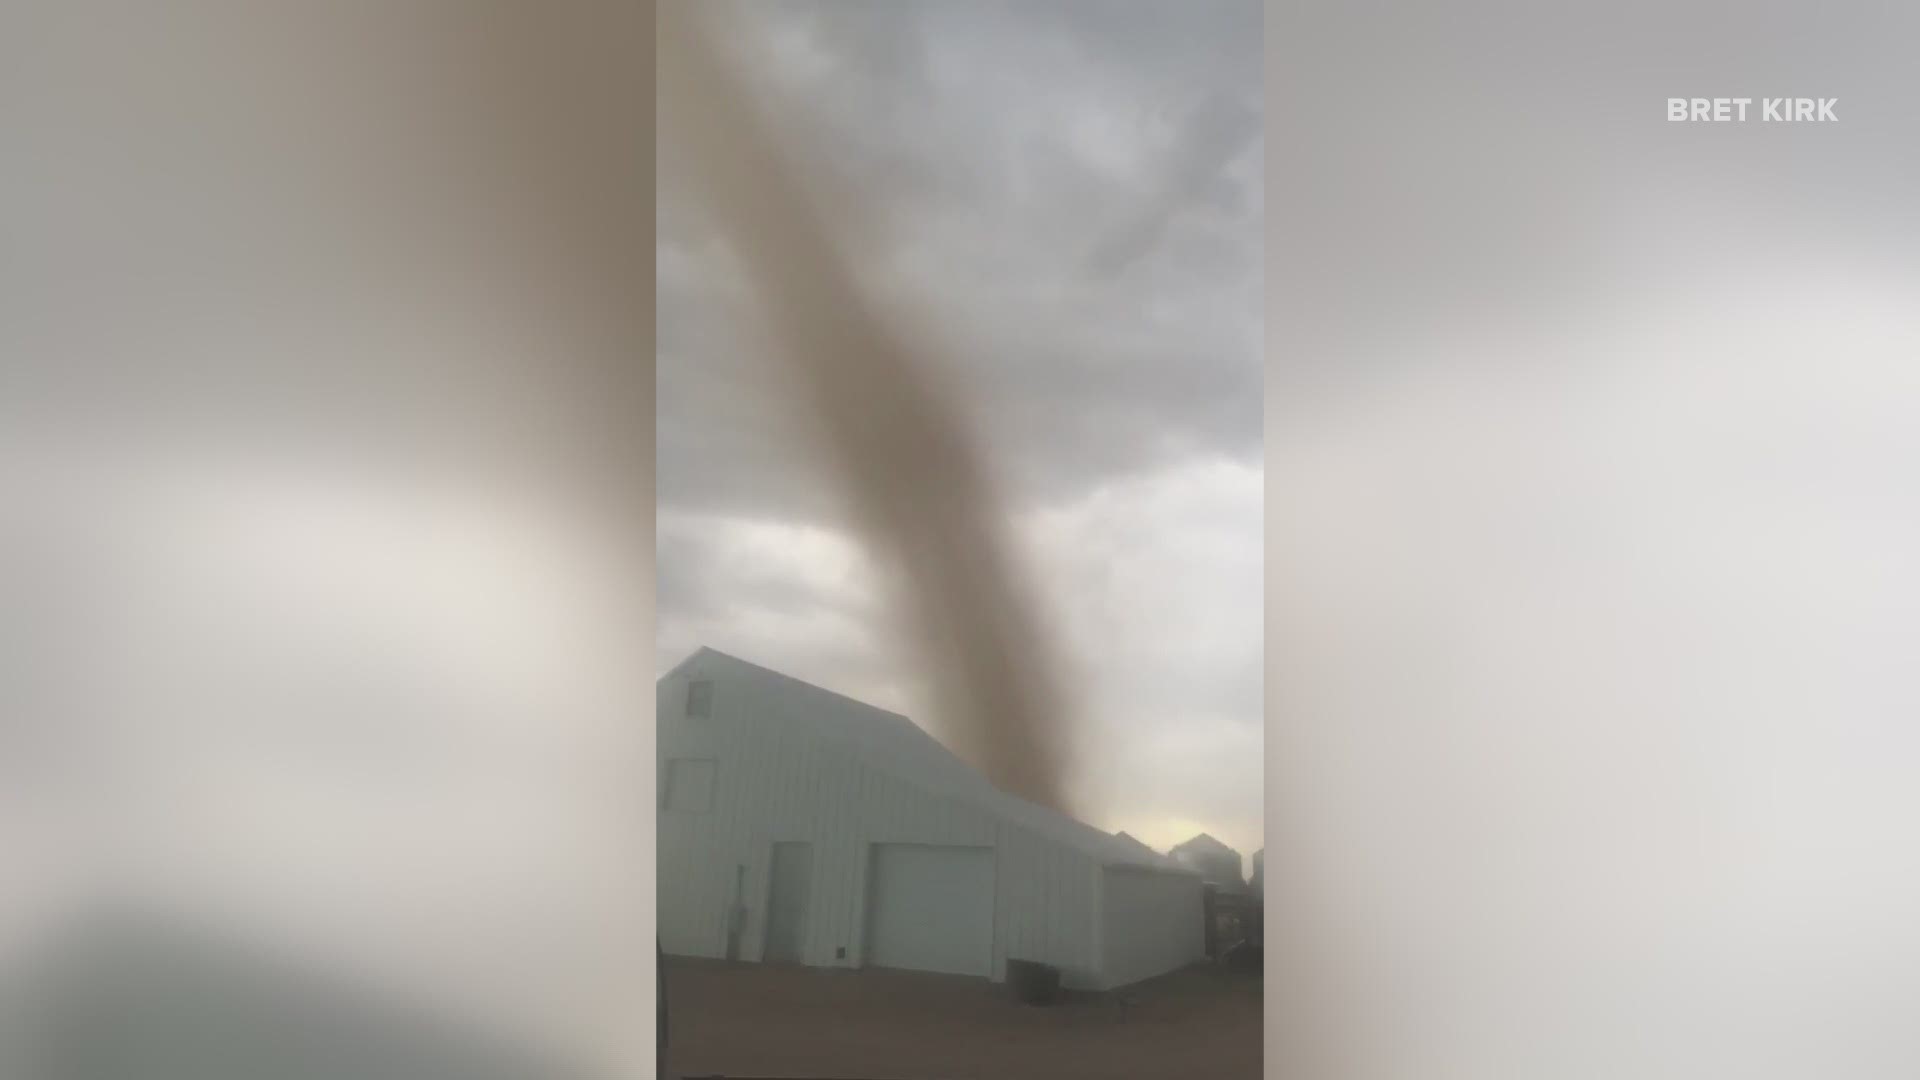 The tornado was spotted Wednesday evening, according to the Sedgwick County Sheriff's Office. Julesberg is in far northeast Colorado.